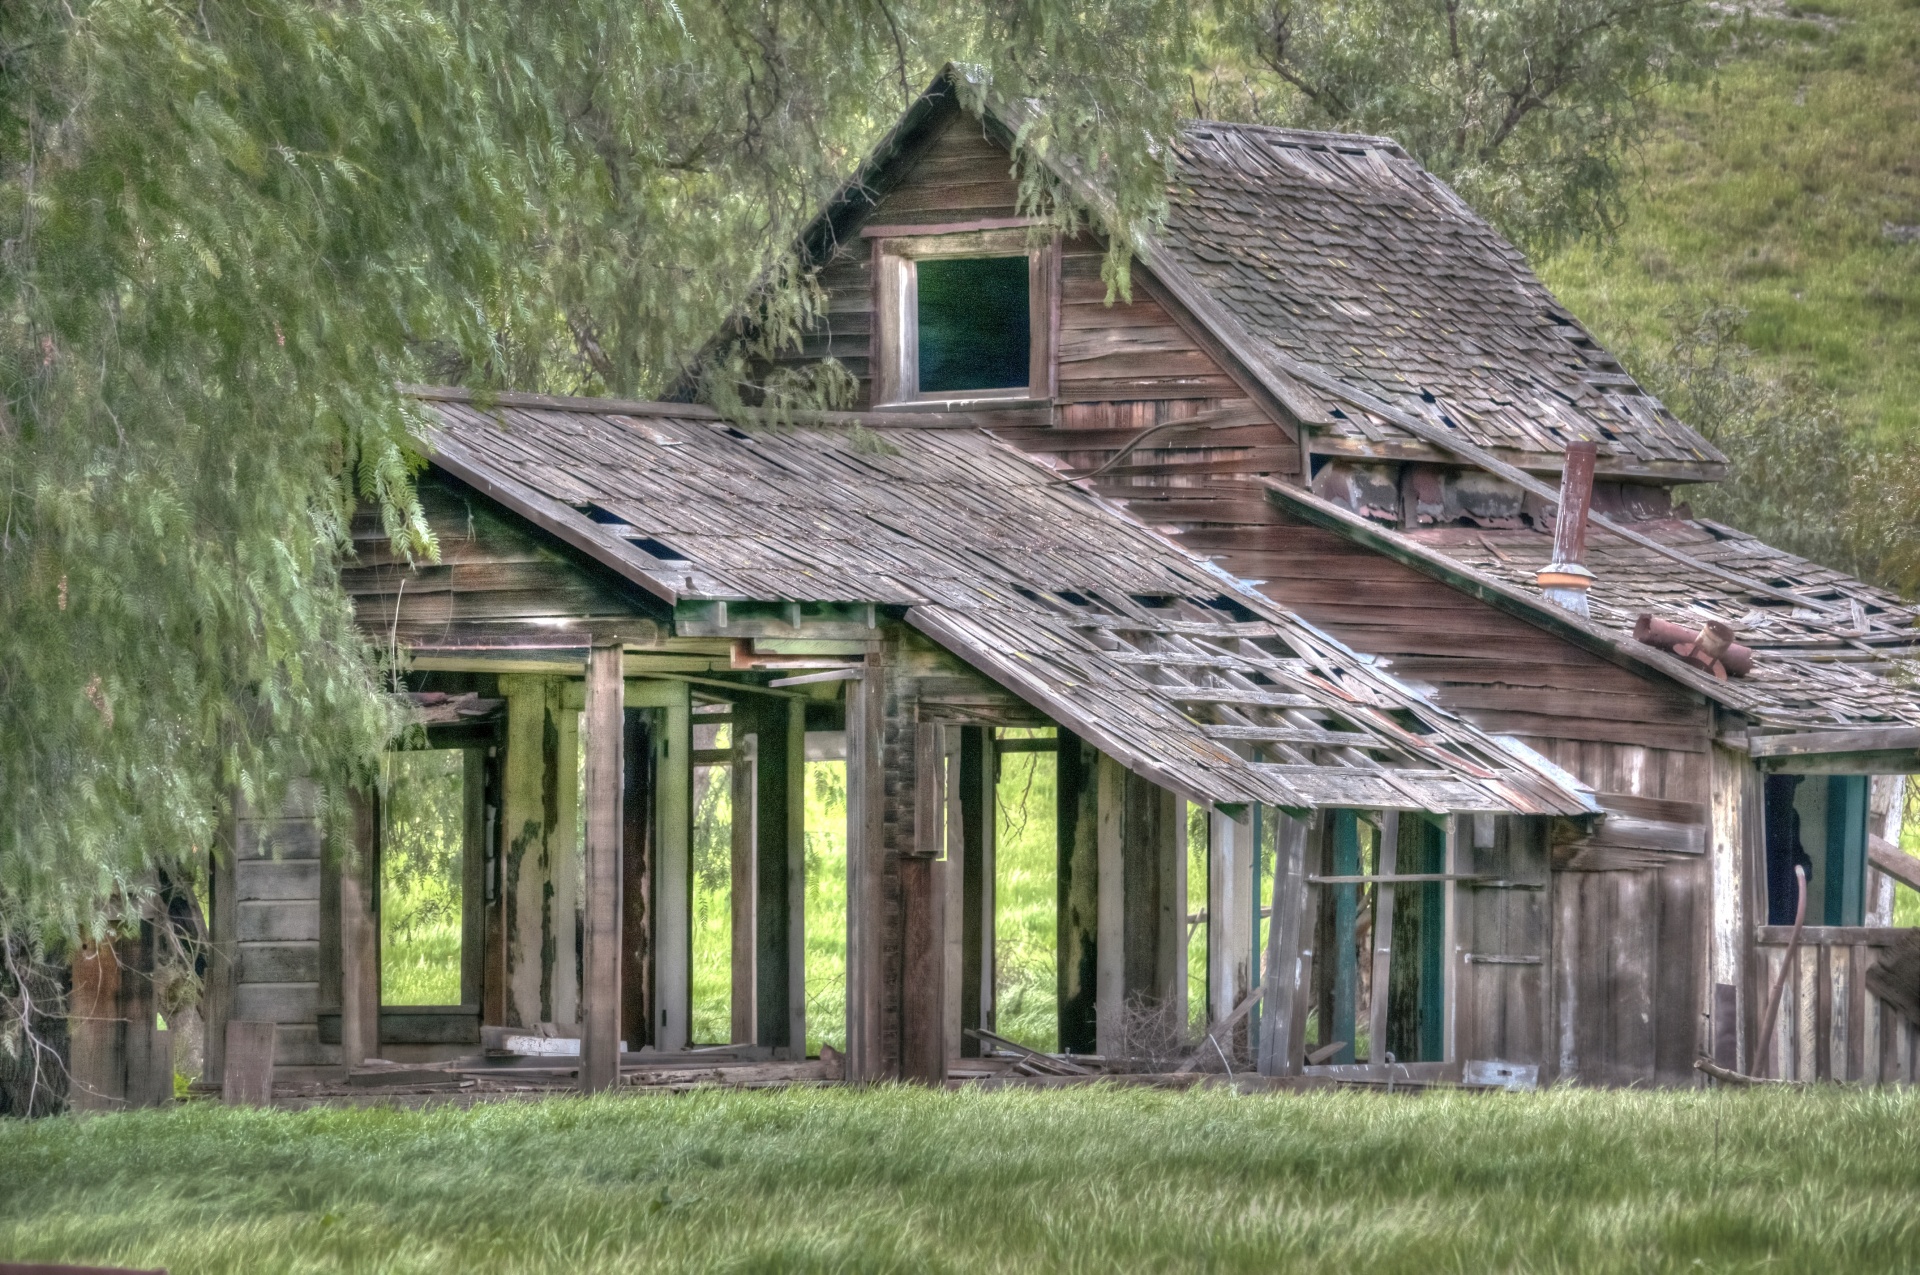 abandoned shack in the country